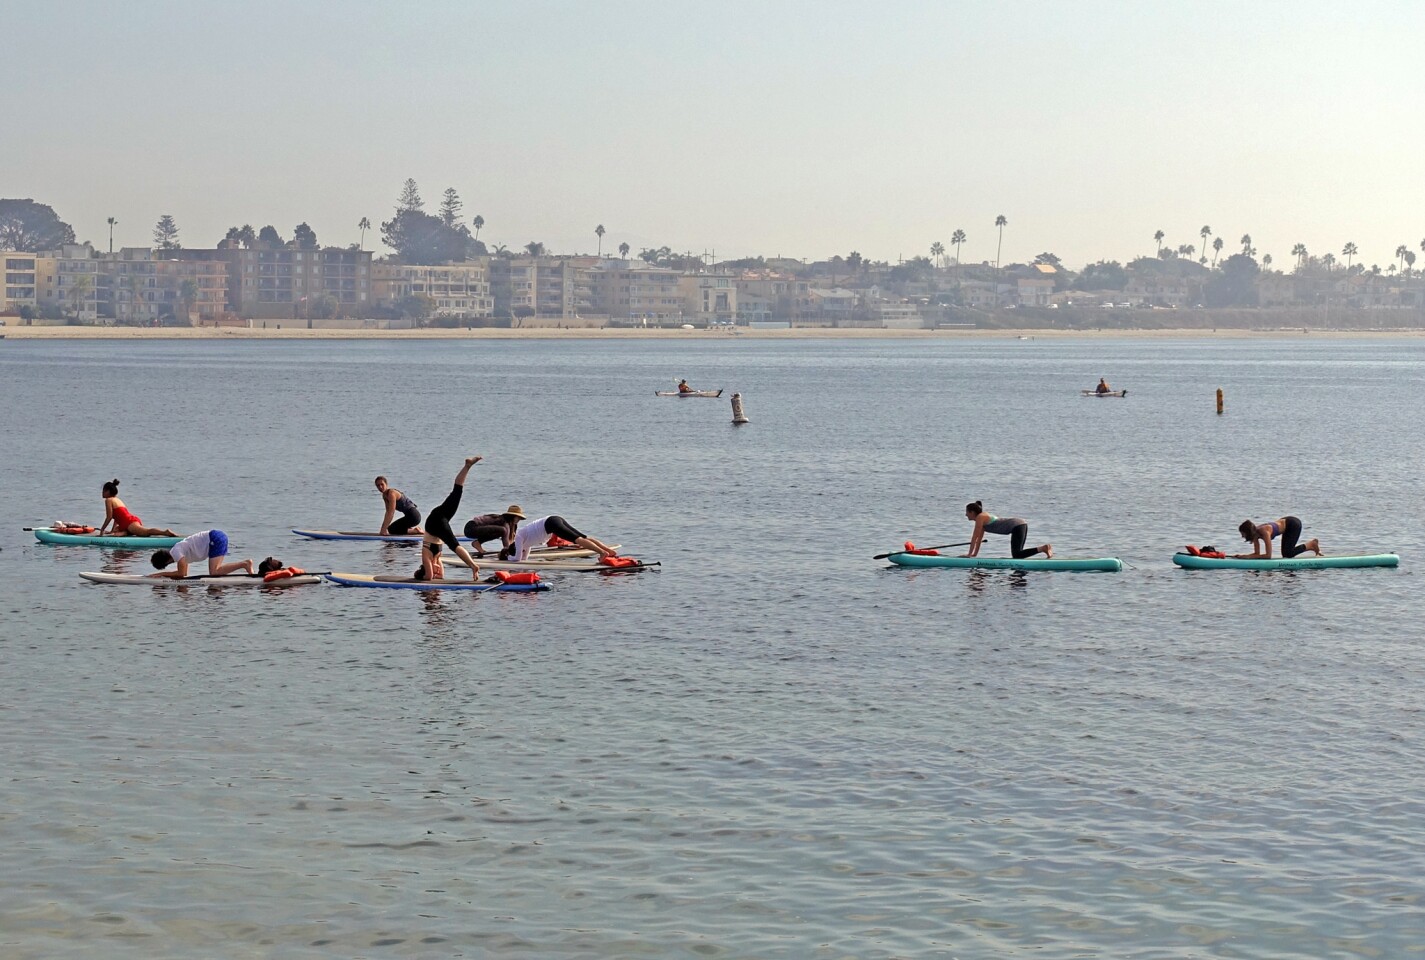 Mission Bay in San Diego is placid enough for paddleboard yoga.